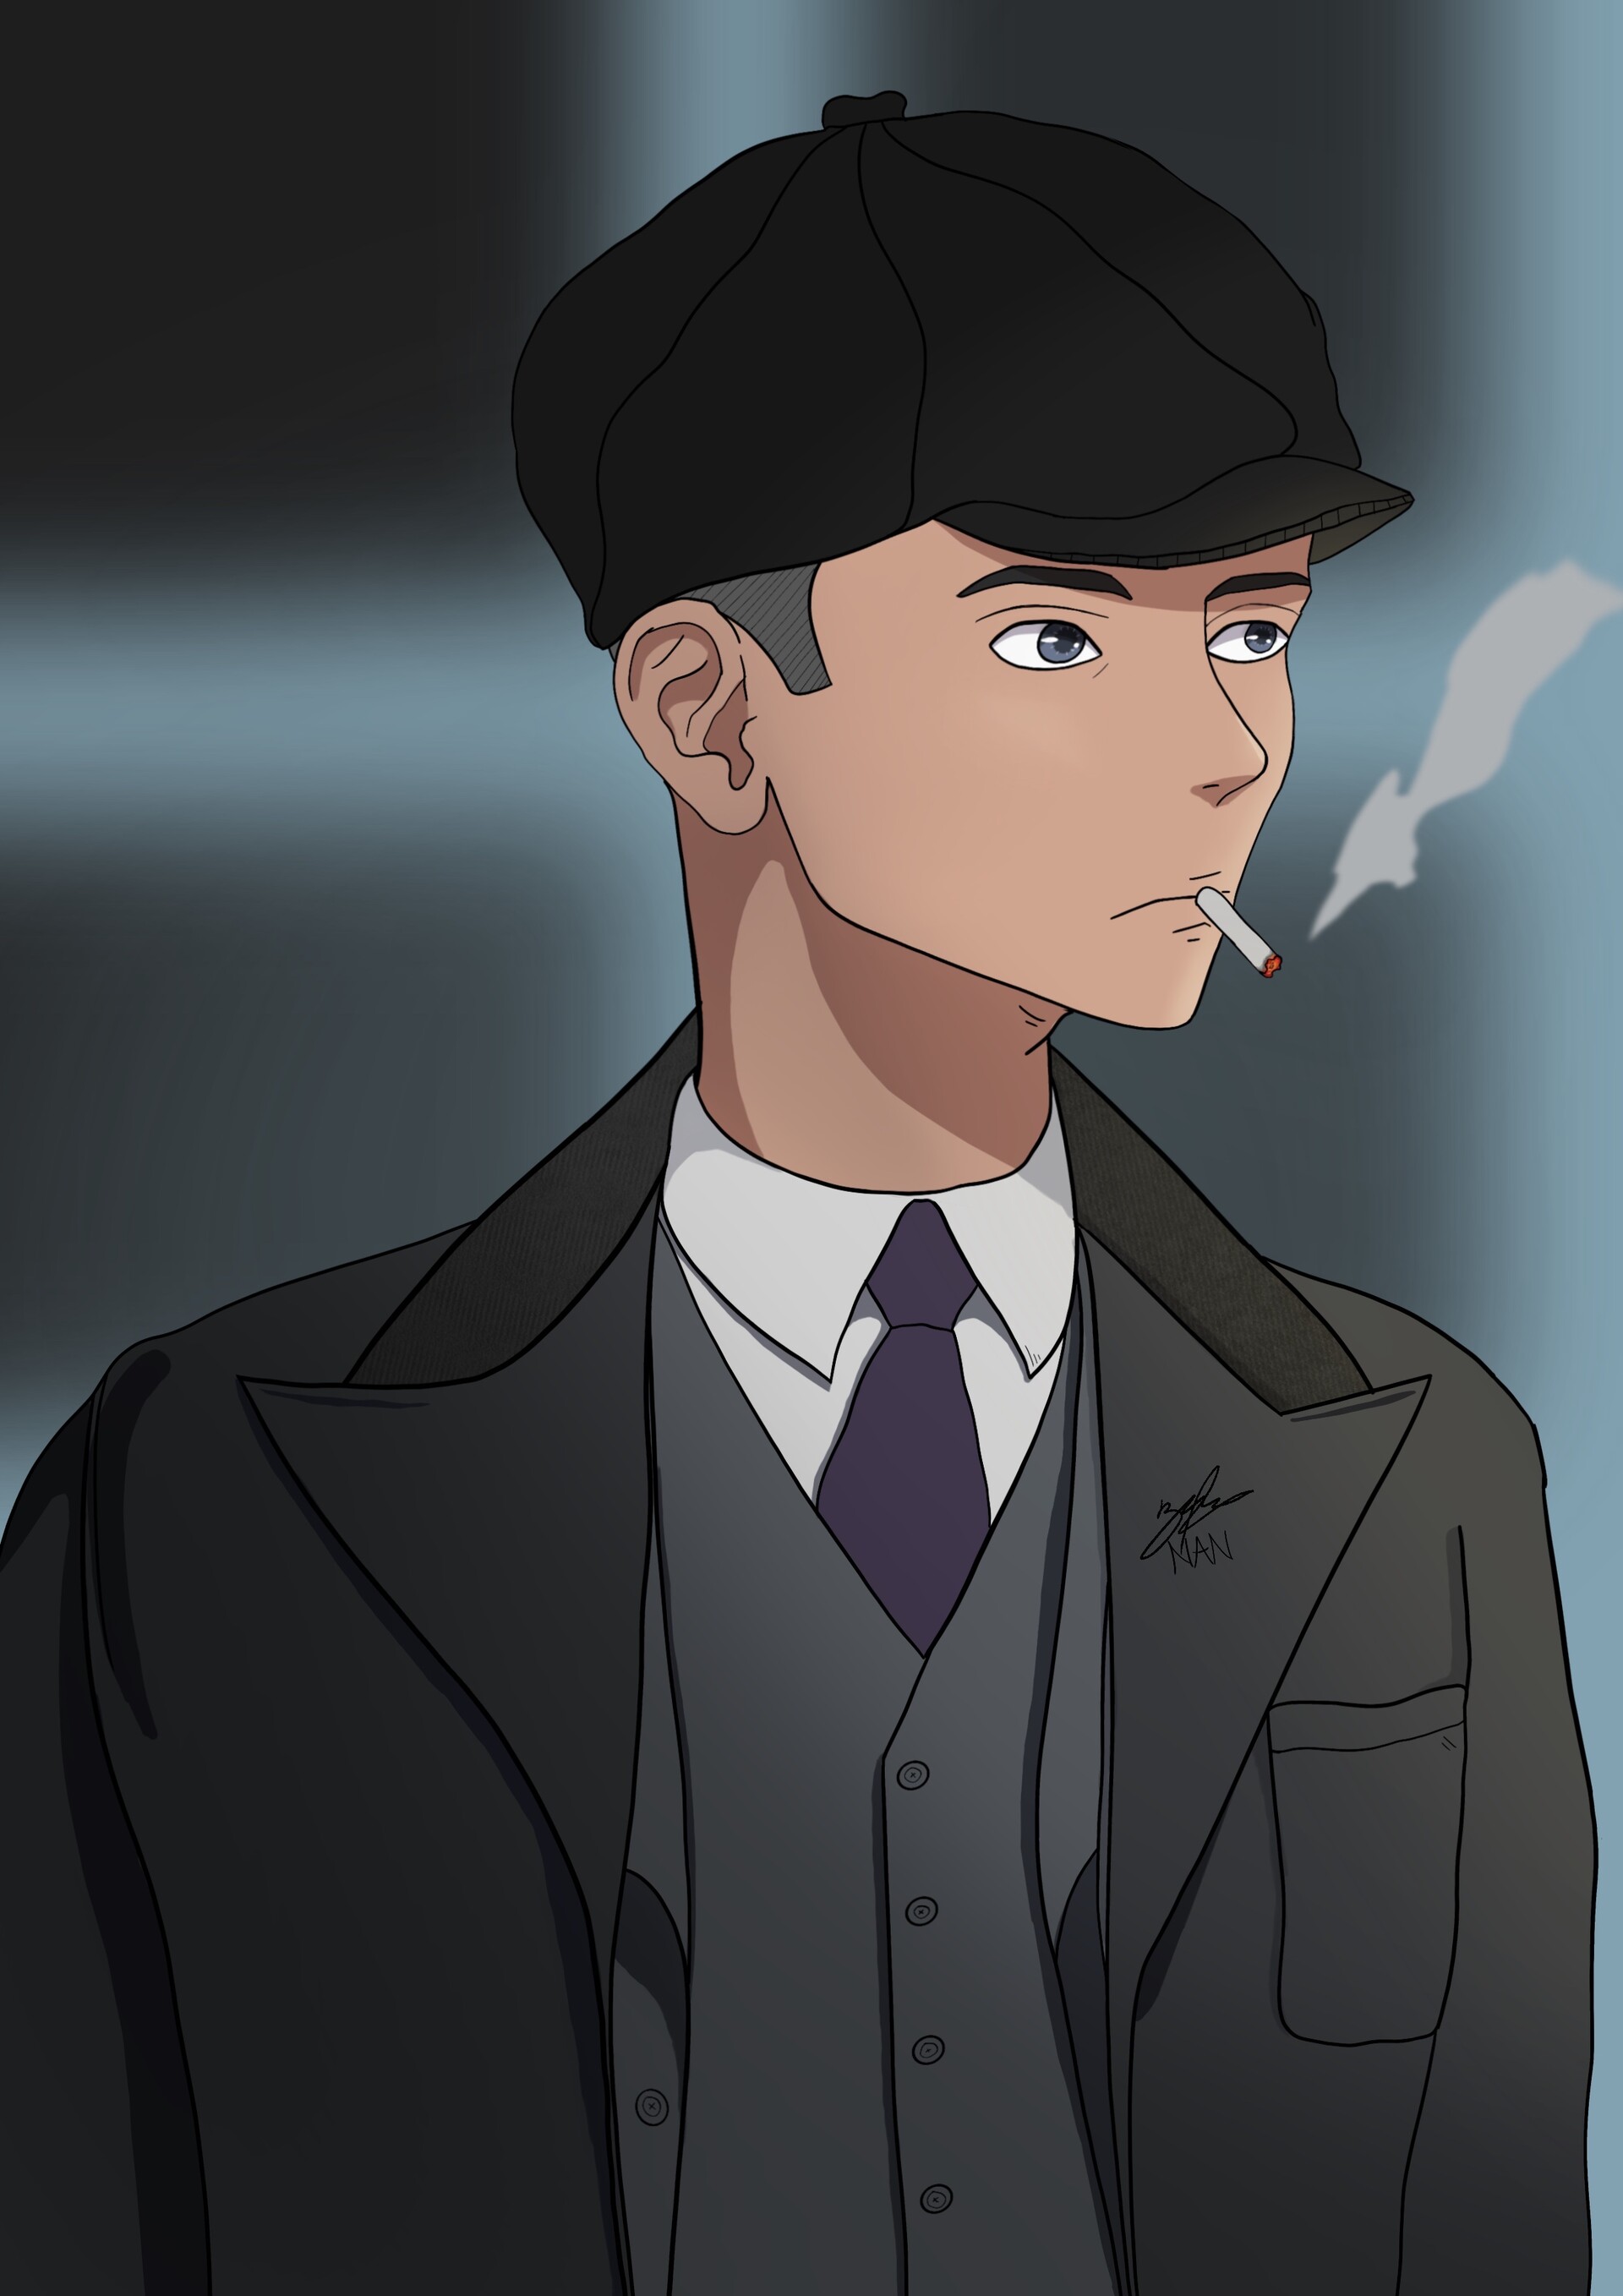 Anime Peaky Blinders 🔥I've never actually posted on Reddit before but I  hope yall enjoy! Could do other characters too if anyone's interested or  has any suggestions! @guiguitheghoul insta for other art